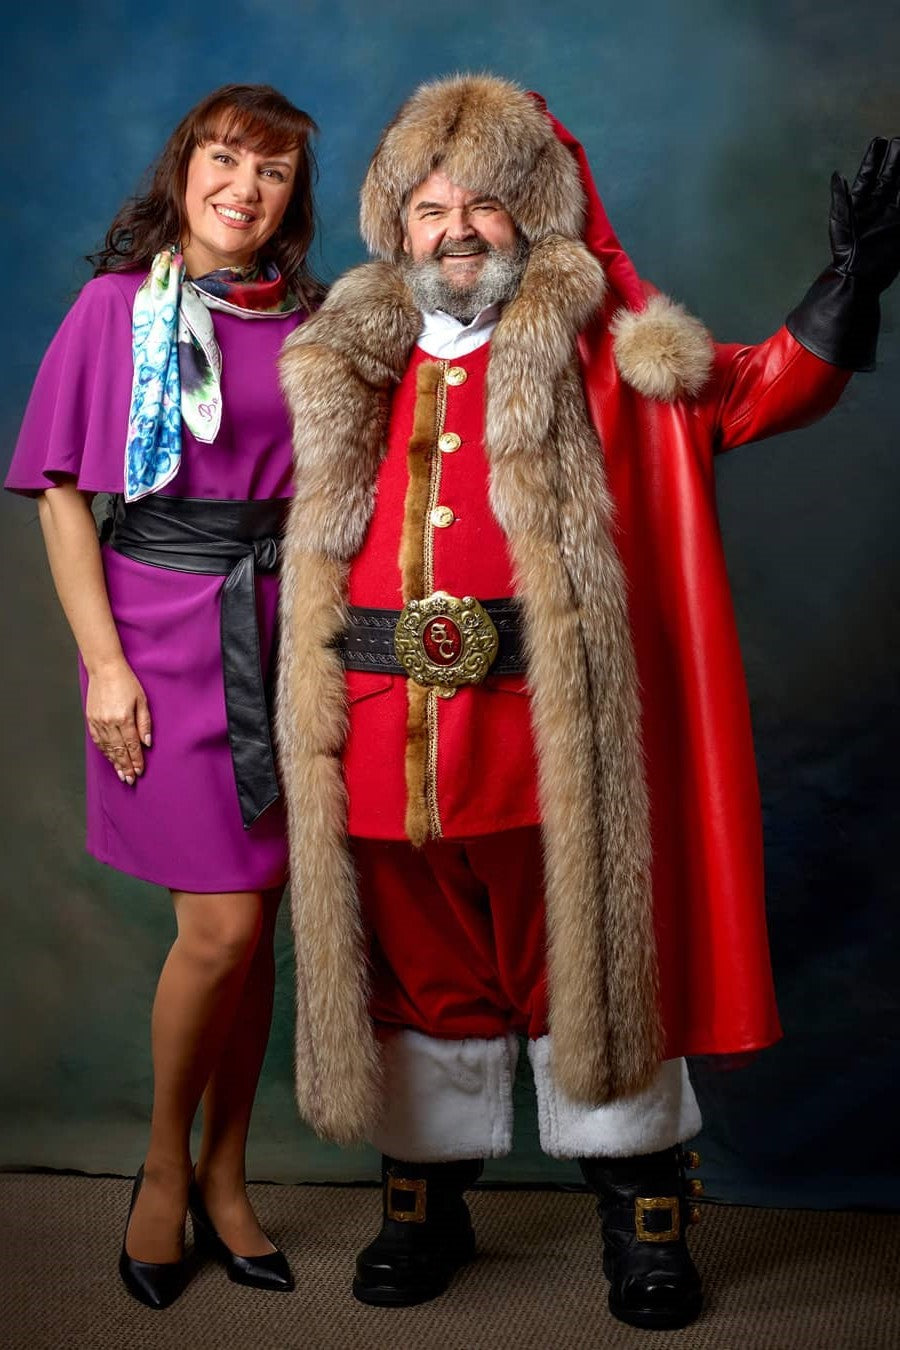 Santa Costume by Chicago Fashion Designer Alesia C. Inspired by "Christmas Chronicles" Movie